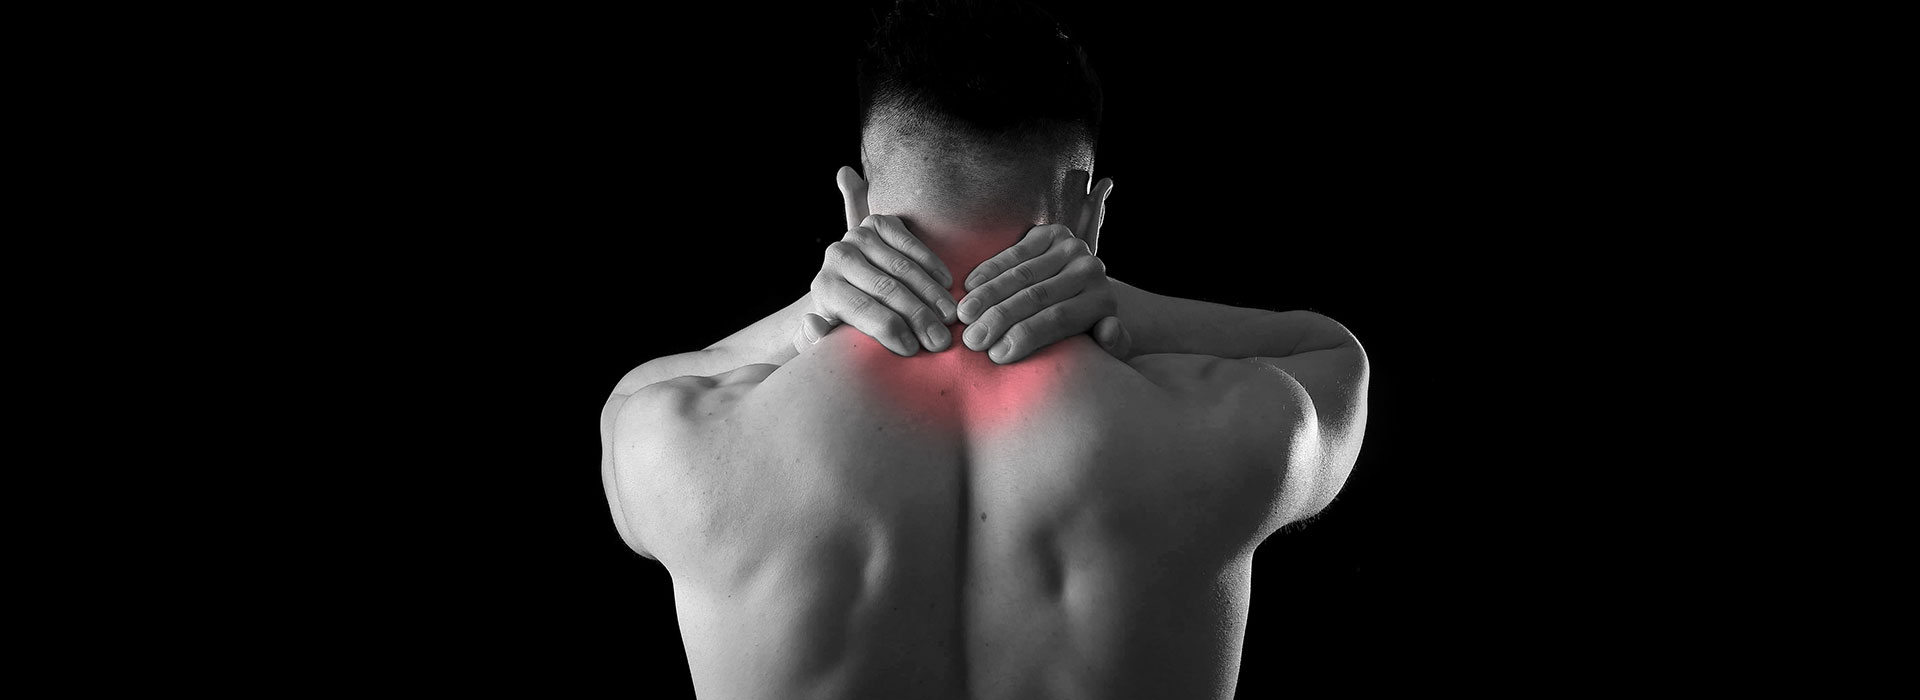 Neck Pain Treatment | Relief from Neck Pain | Effective Treatment for Chronic Neck Pain